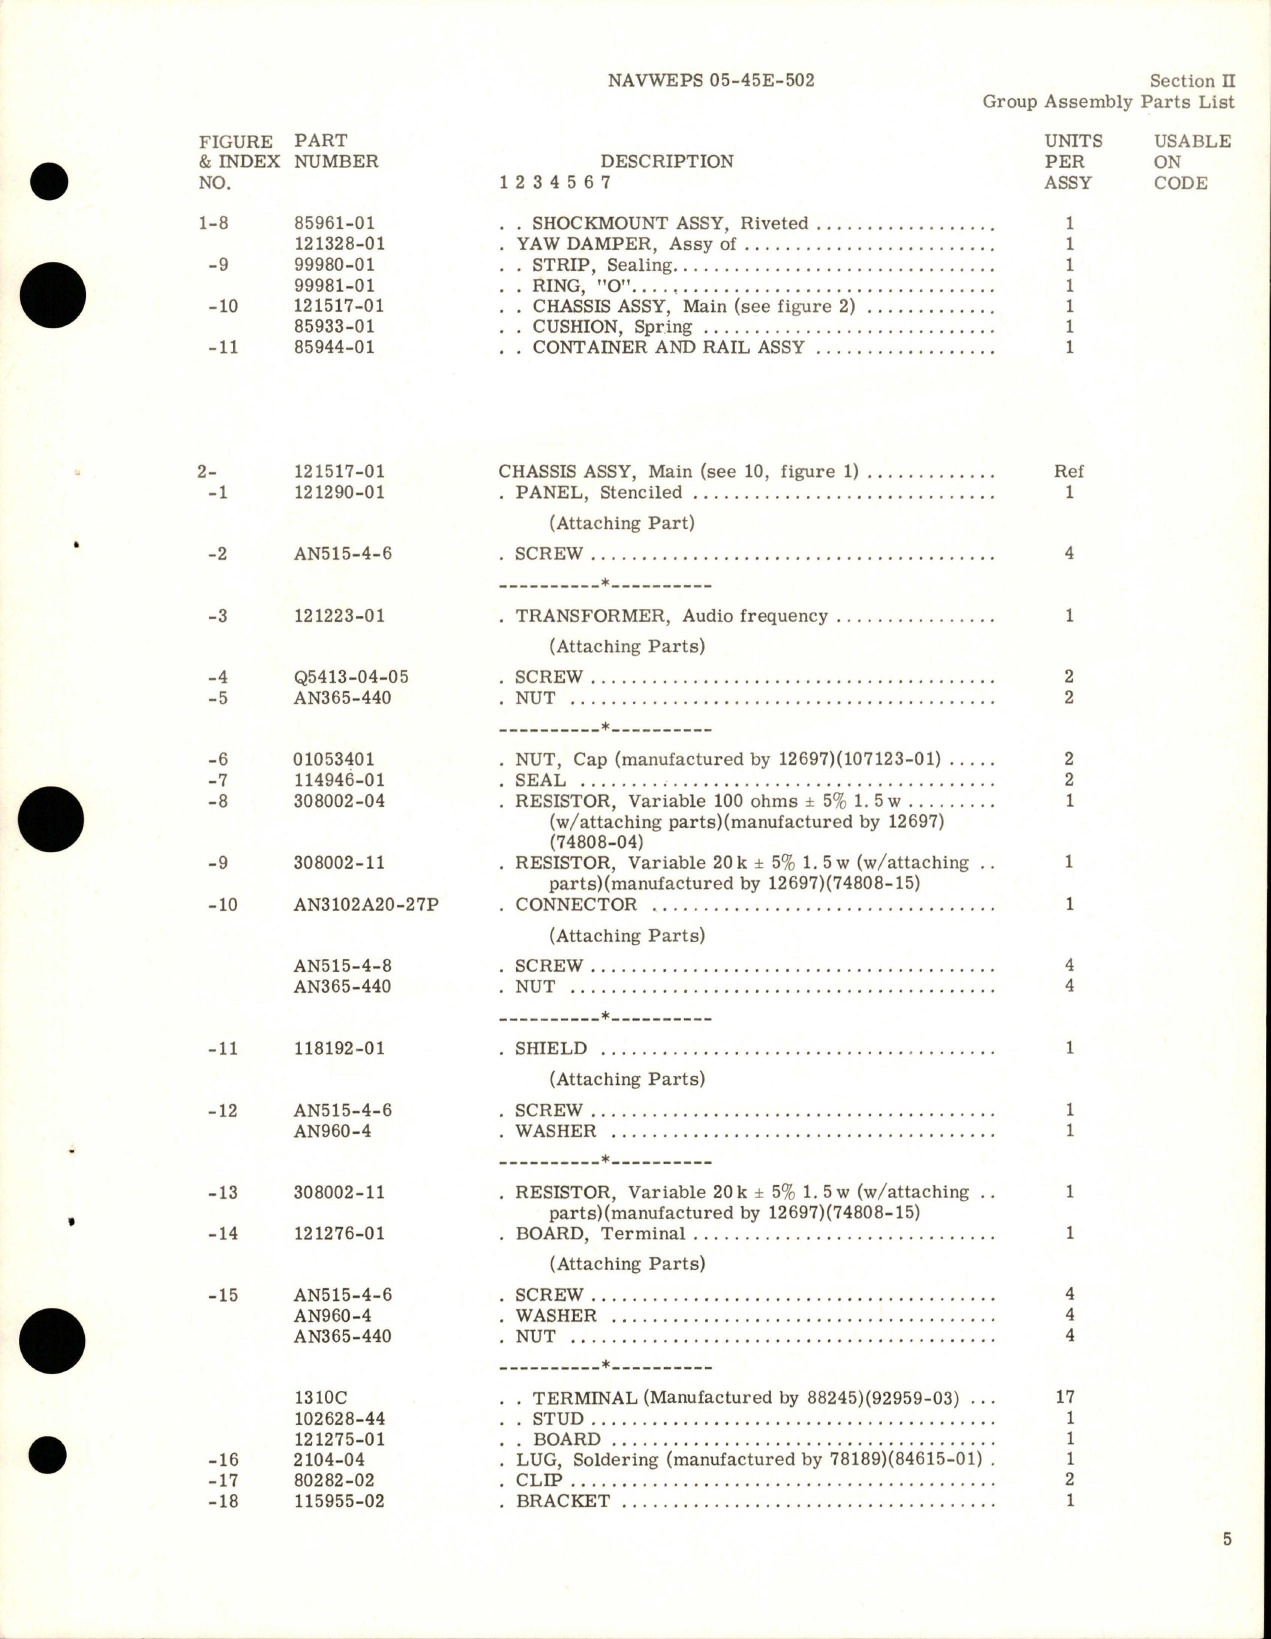 Sample page 7 from AirCorps Library document: Illustrated Parts Breakdown for Yaw Damper and Mounting Base - Models 1500P, and 1500P-1 - Parts 121956-01 and 12156-02